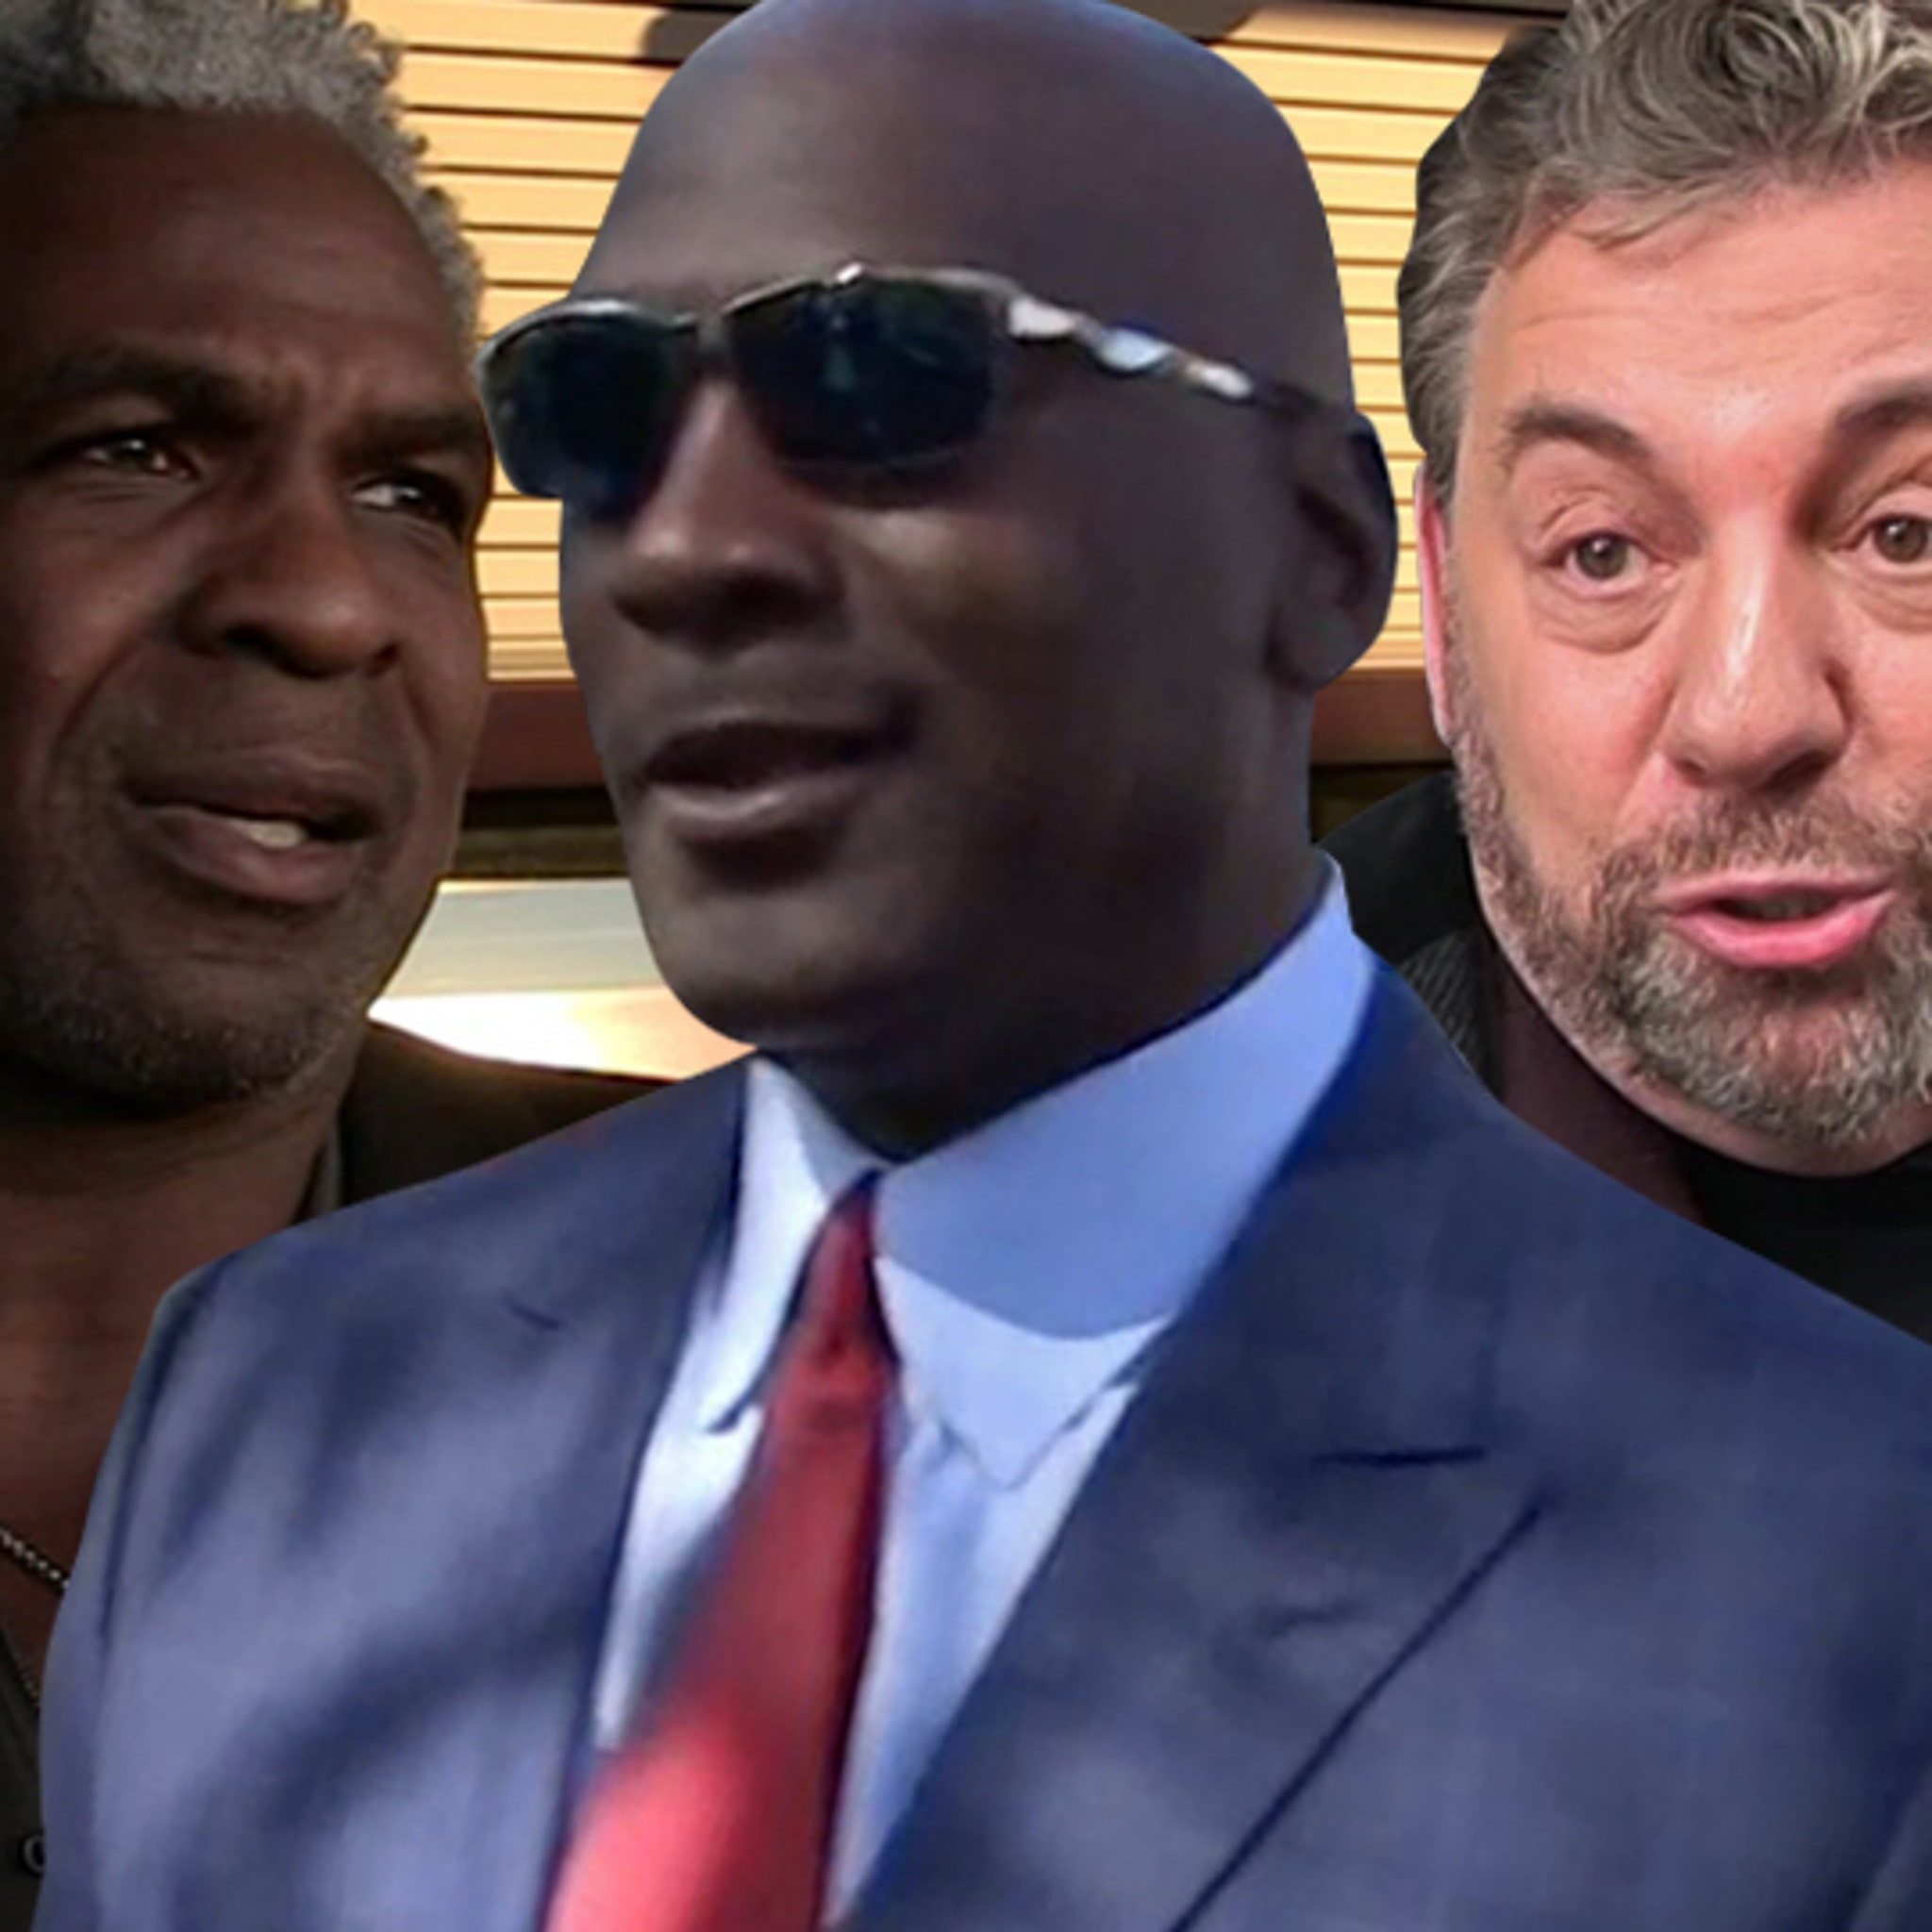 Michael Jordan Plays Peacemaker with Charles Oakley and Knicks Owner